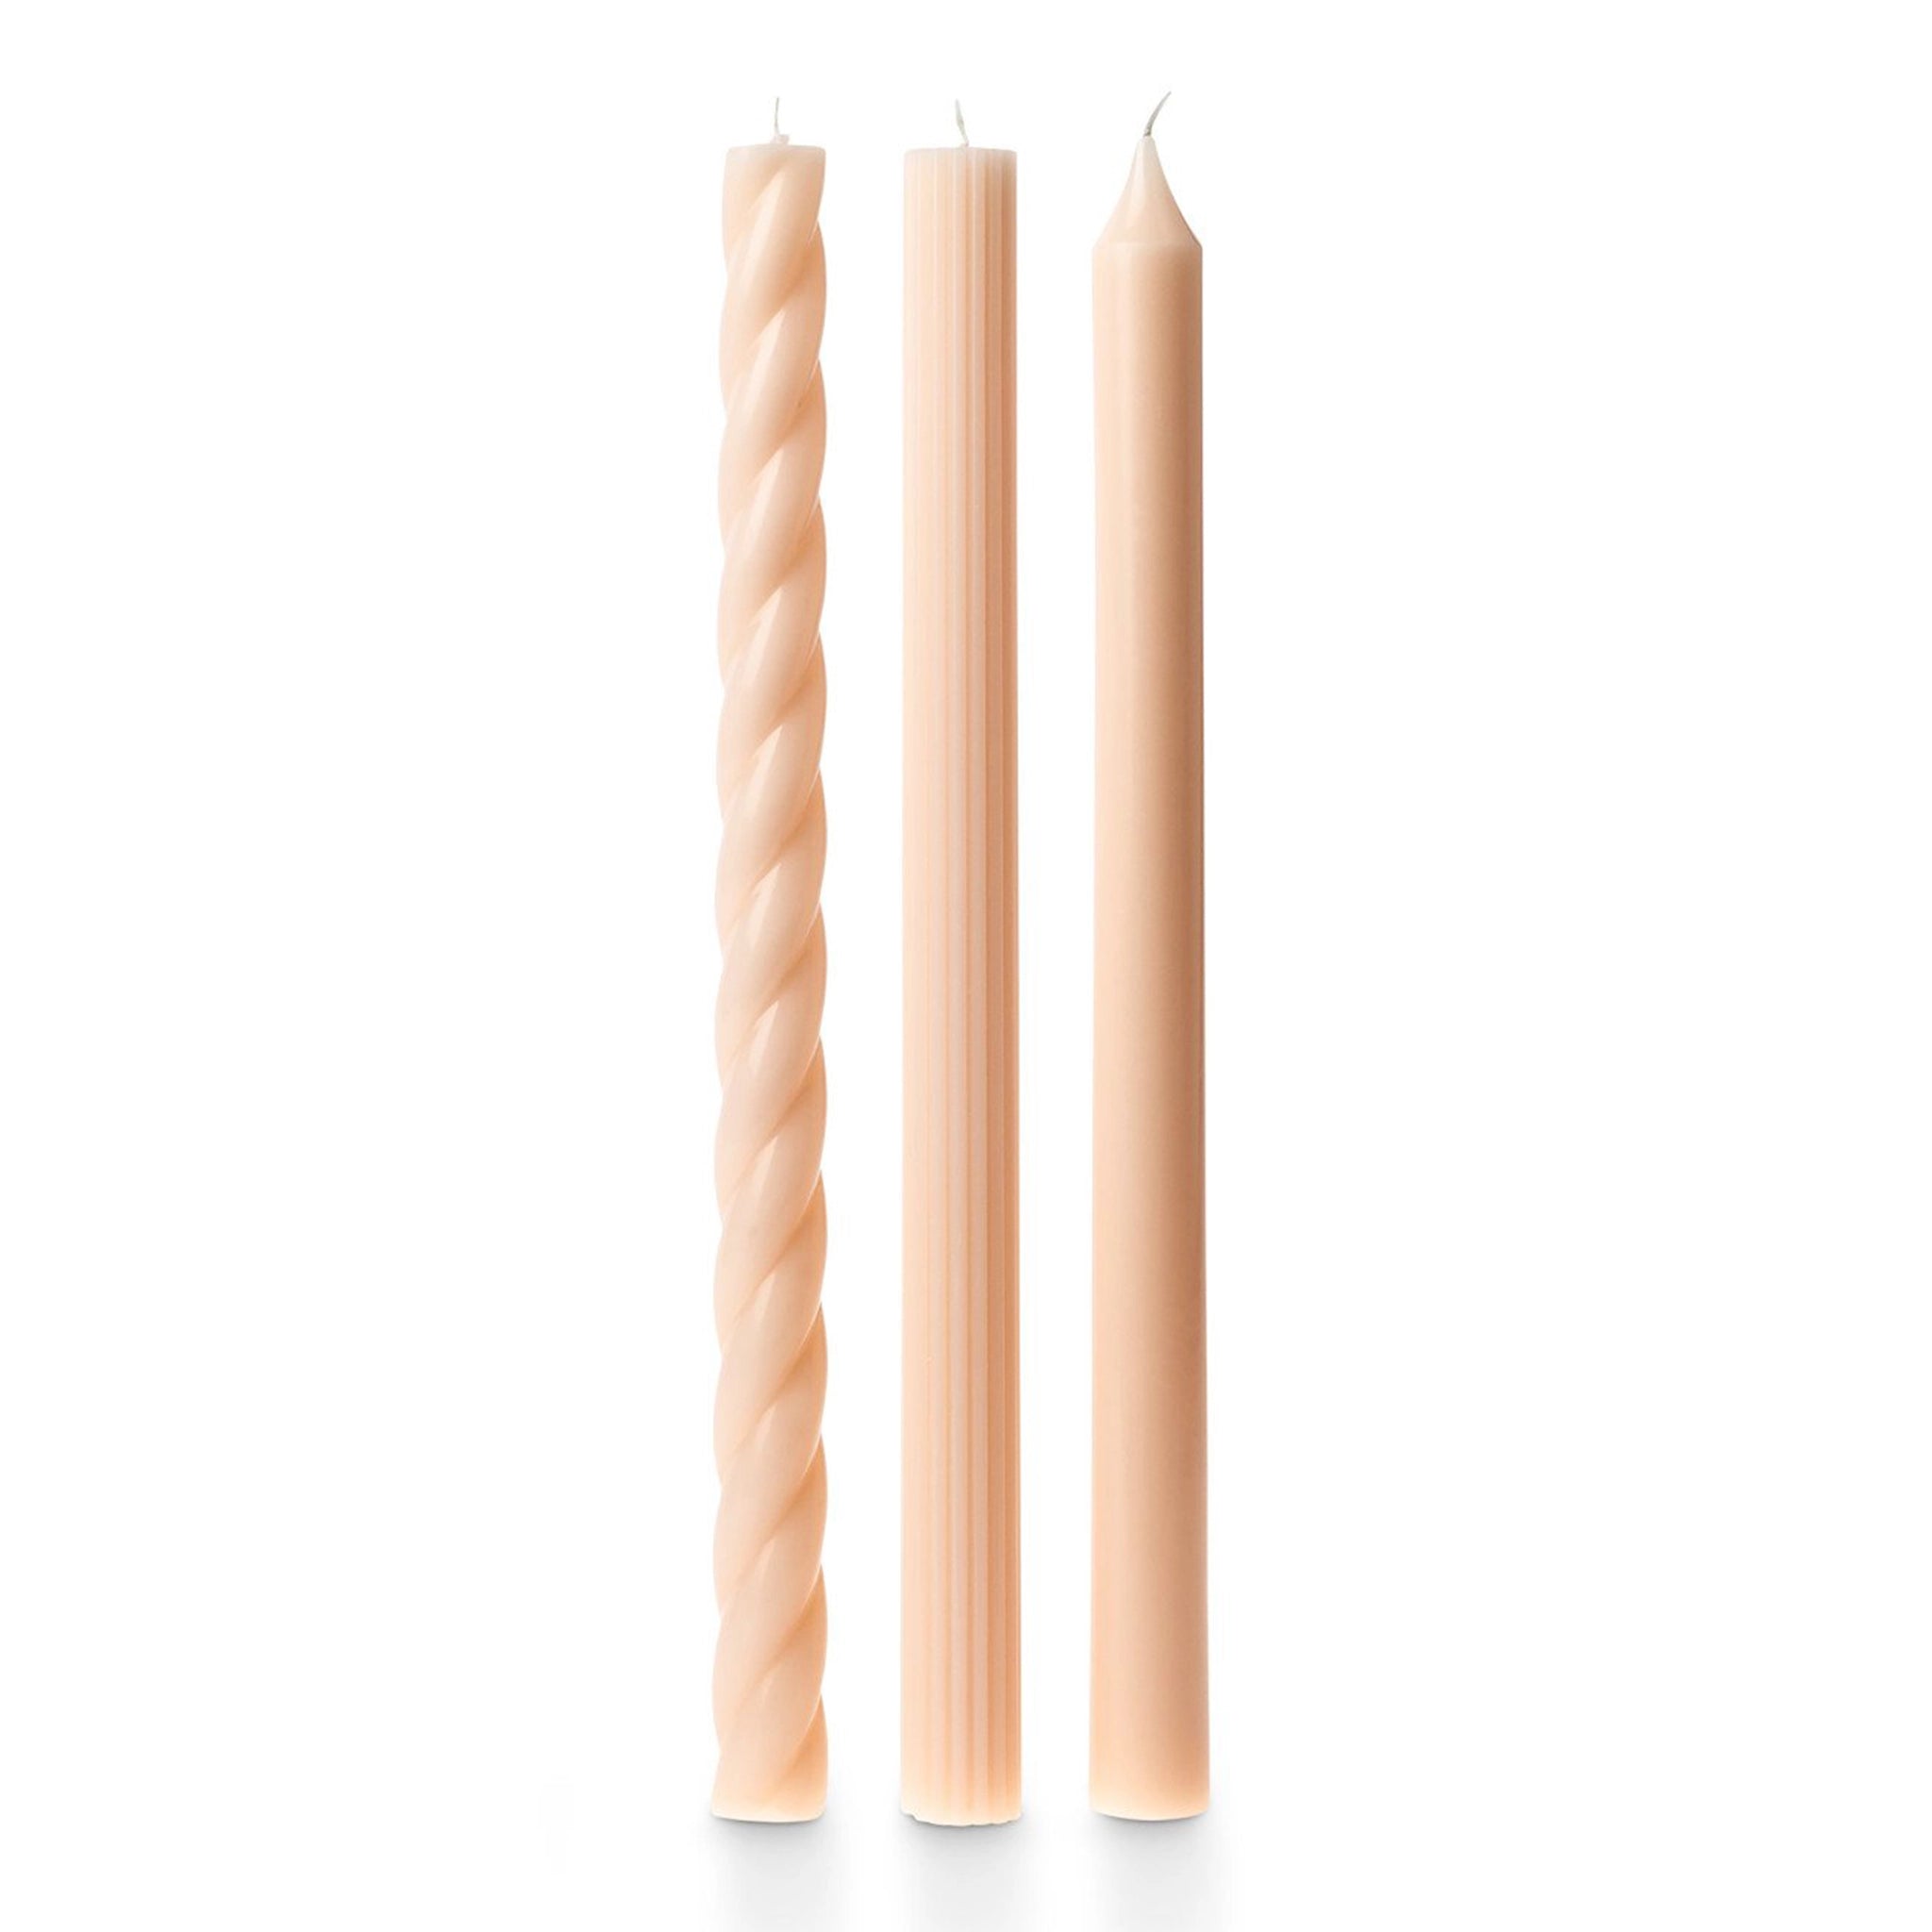 A photo of three off white tapered candles. There are three different styles, one twisted, one vertically ribbed and the other smooth.